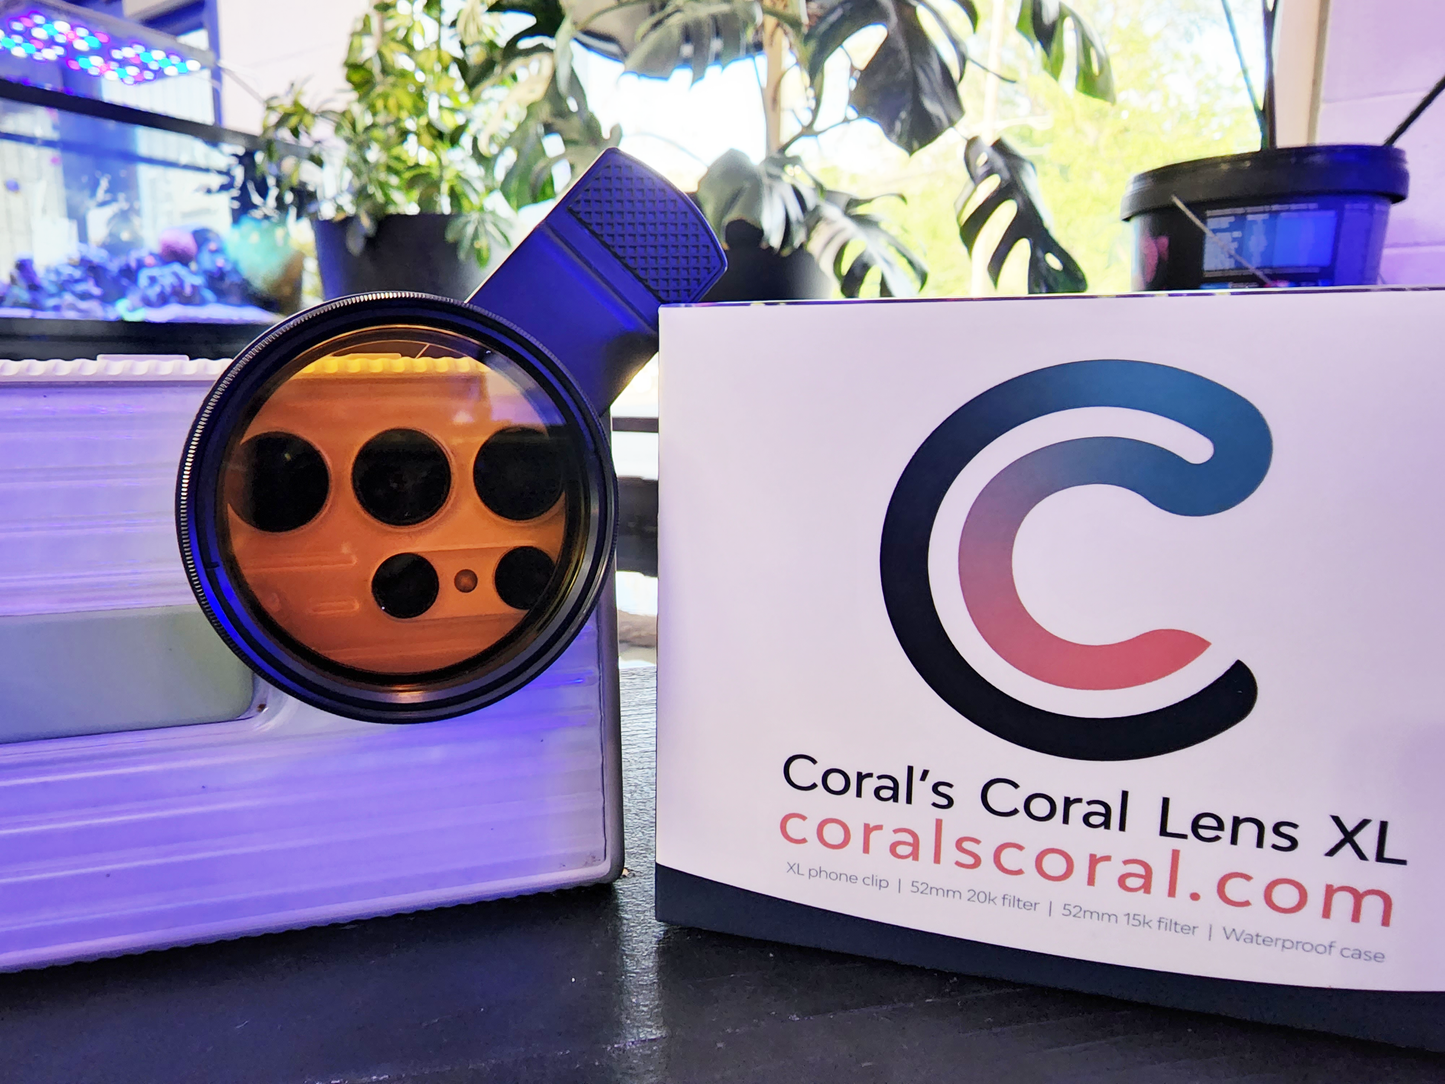 NEW IN 2022! Coral's Coral Lens XL 52mm for Cell Phones & DSLR Cameras - SHIPS FREE! Works with iPhone 13 Pro Max & Samsung Galaxy S22 Ultra - Coral's Coral Lens